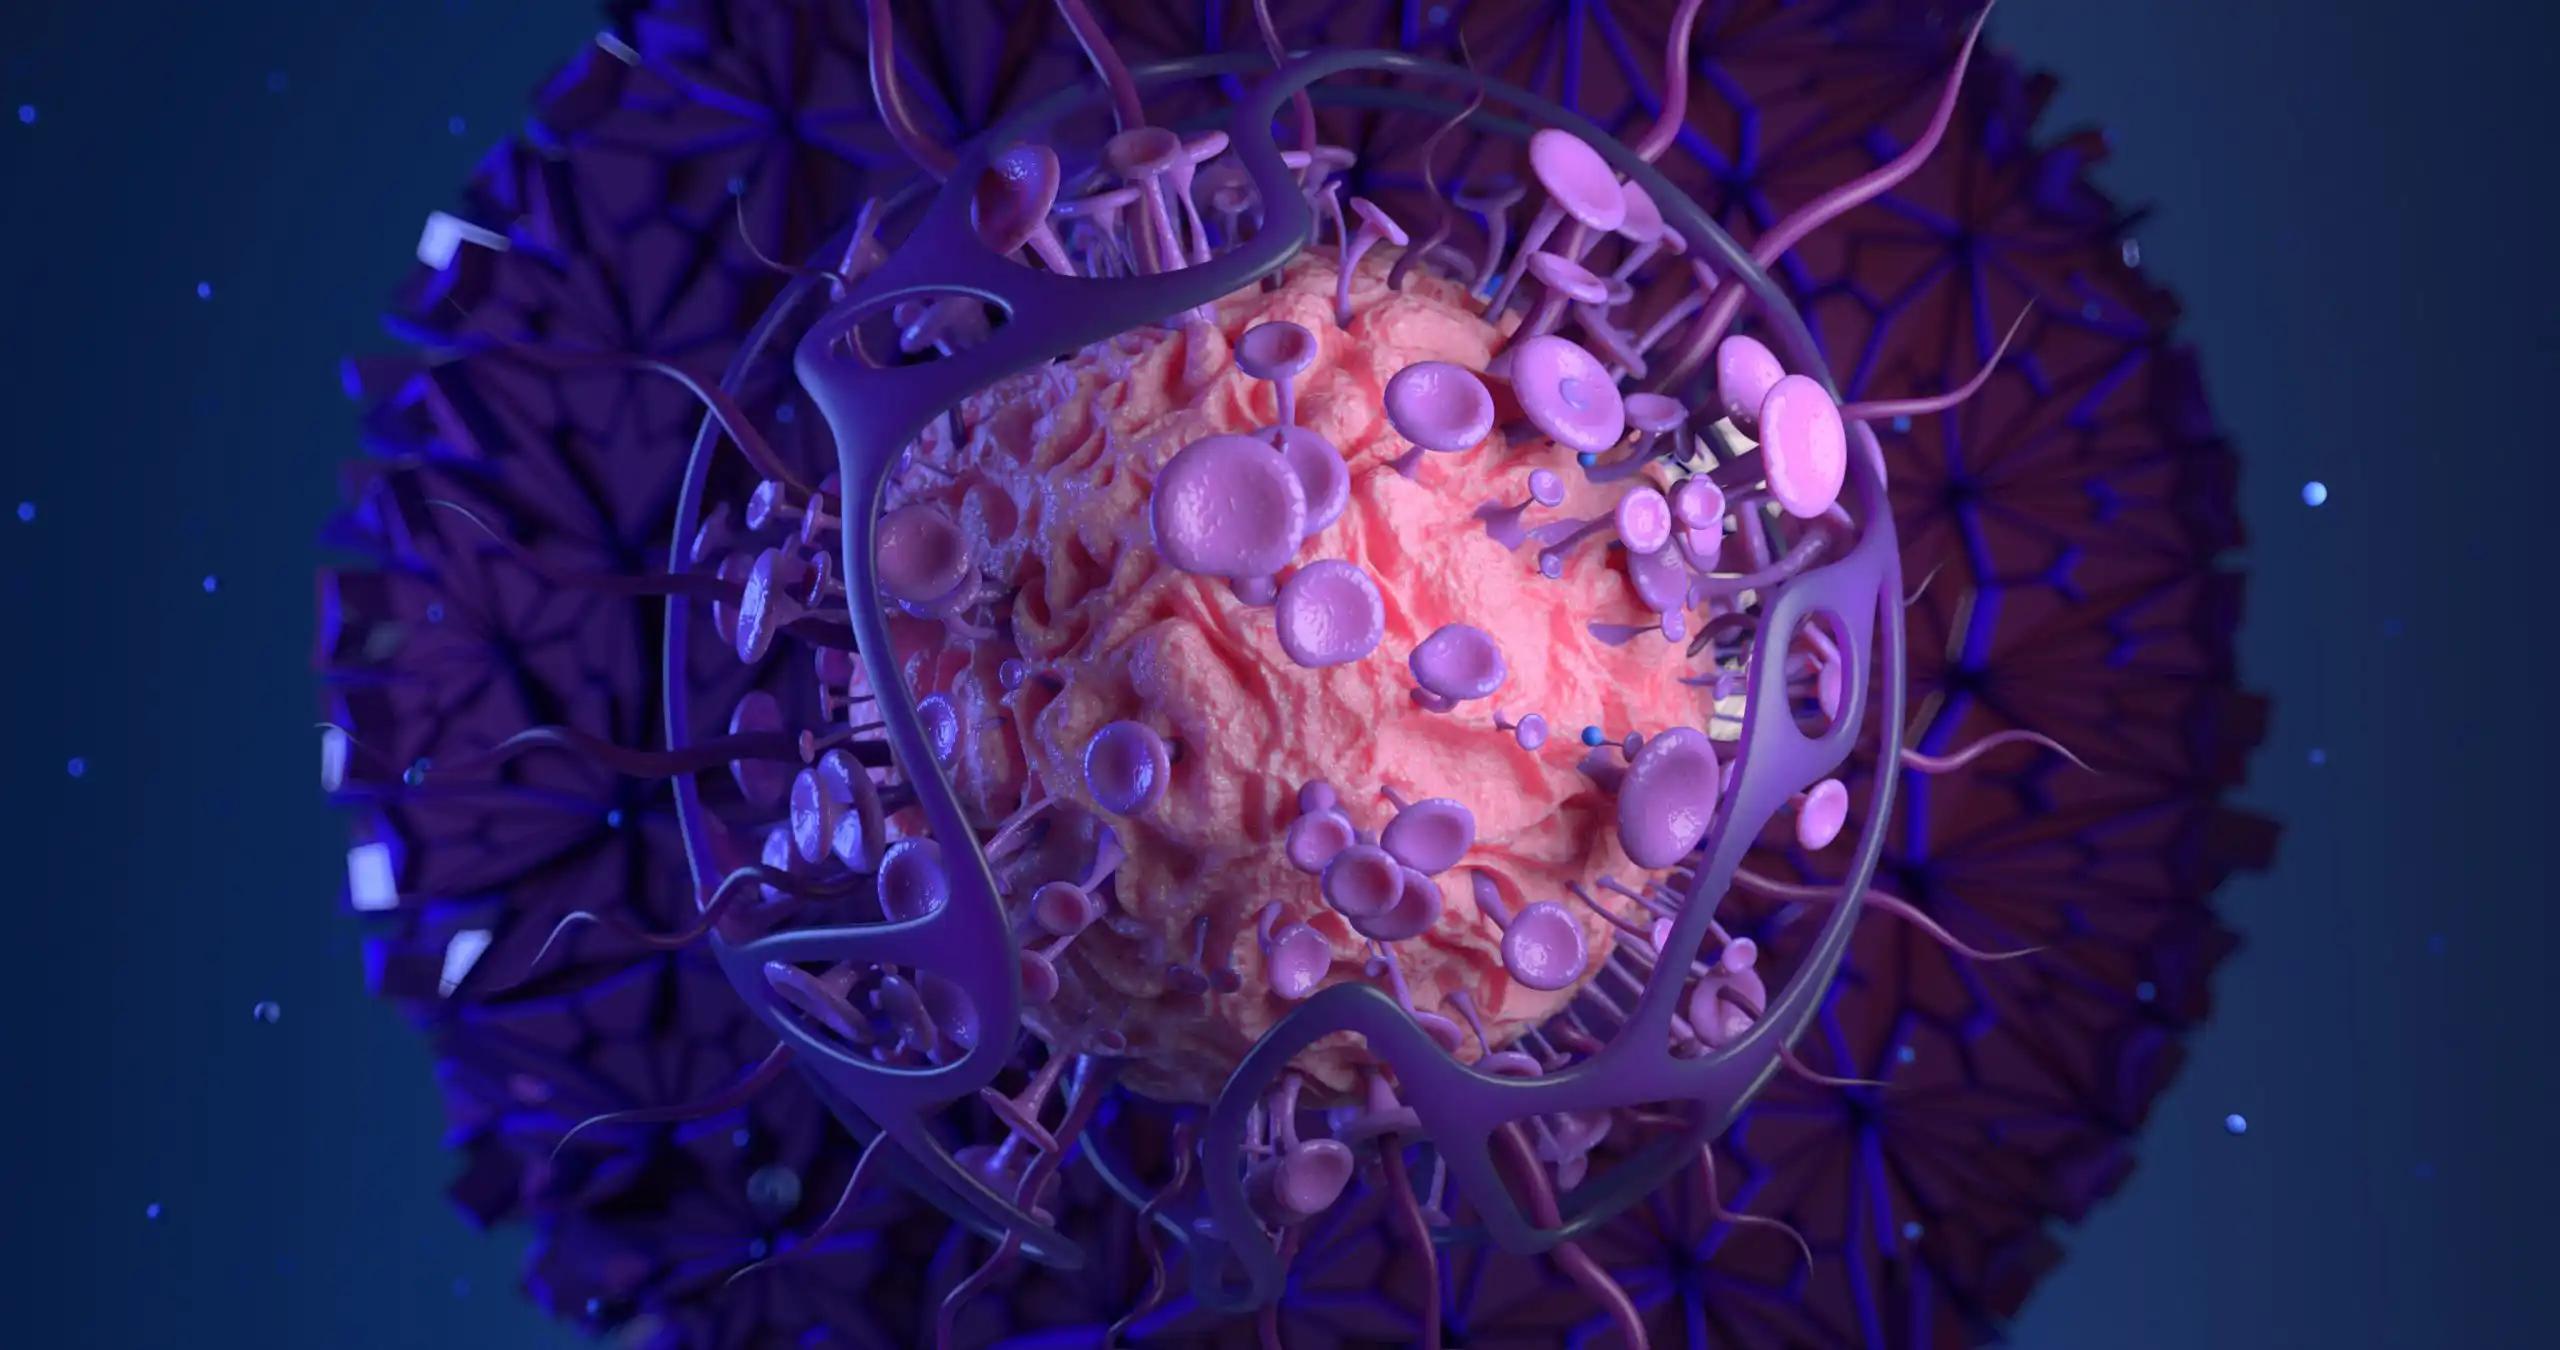 3D VIew of Cells and Biomolecules